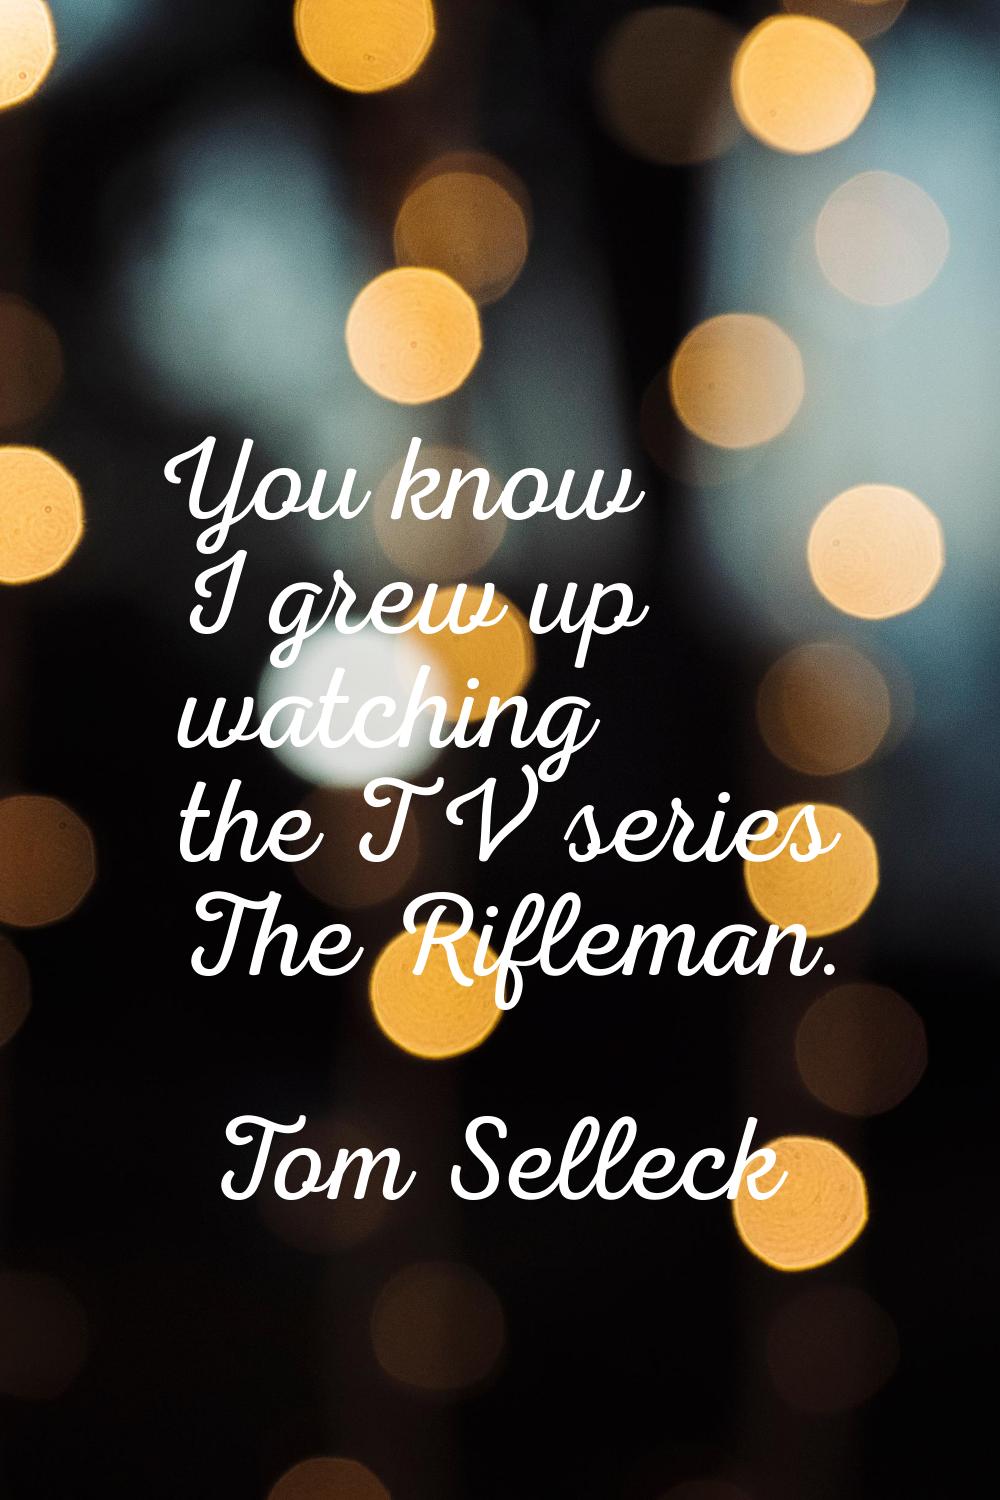 You know I grew up watching the TV series The Rifleman.